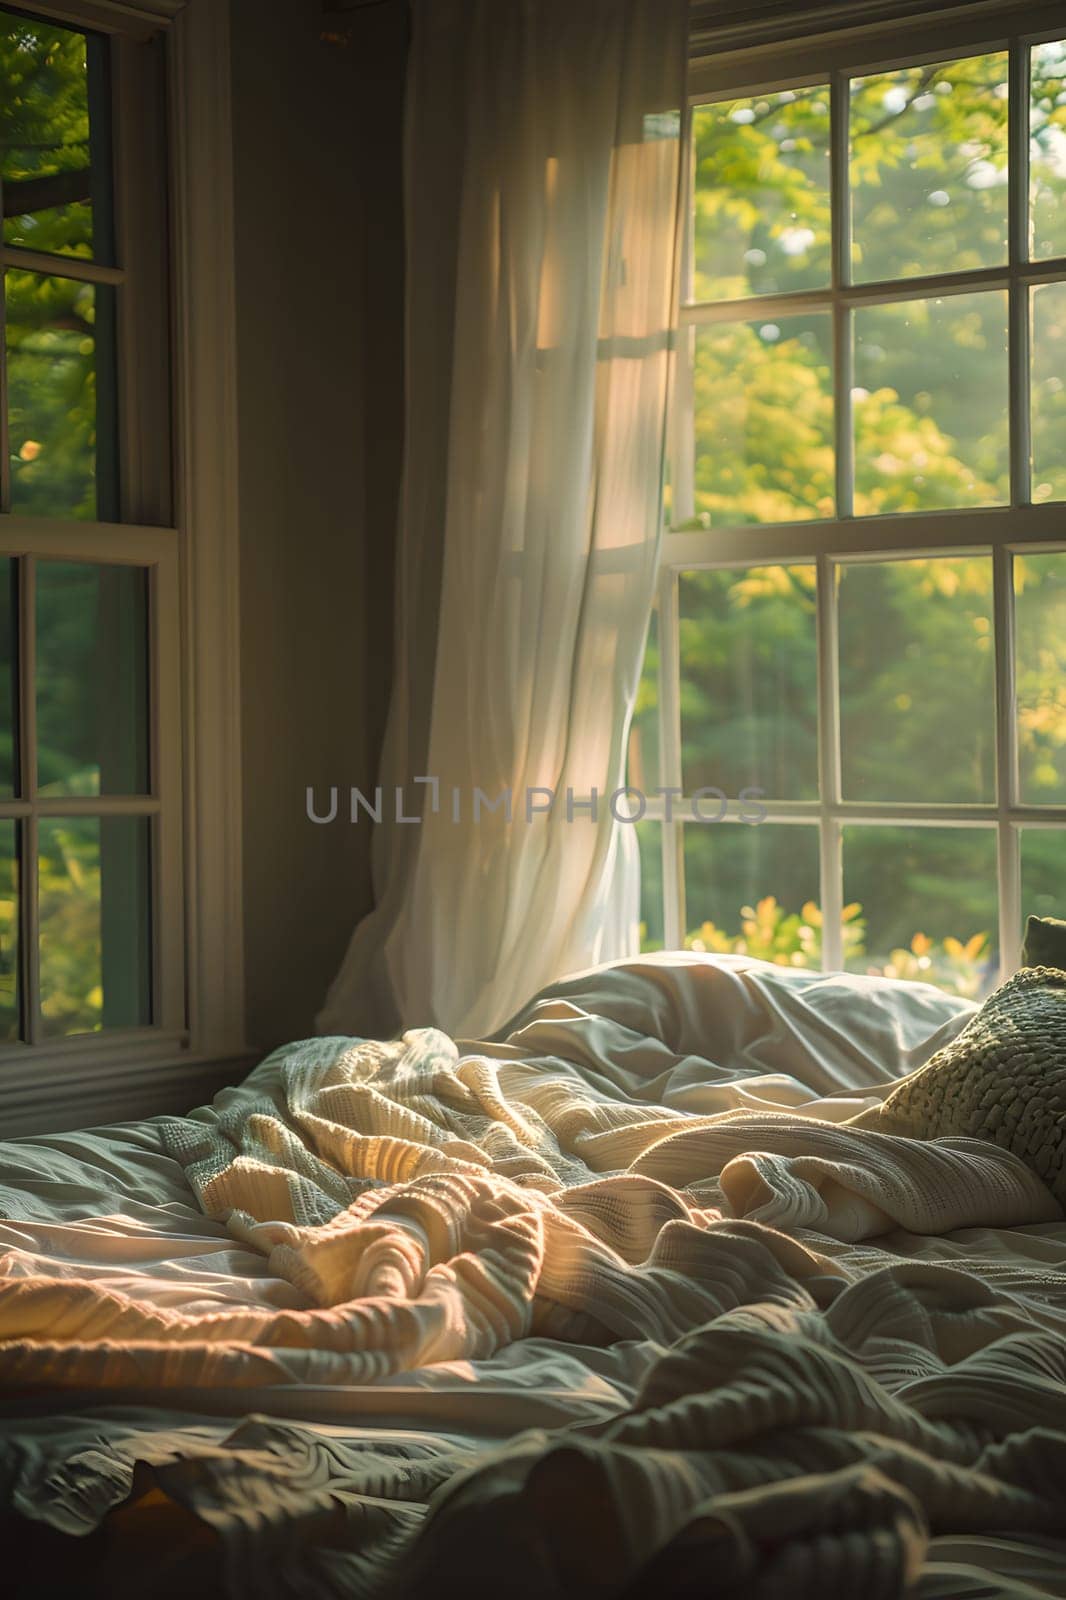 a bed is sitting in front of a window with the sun shining through it by Nadtochiy